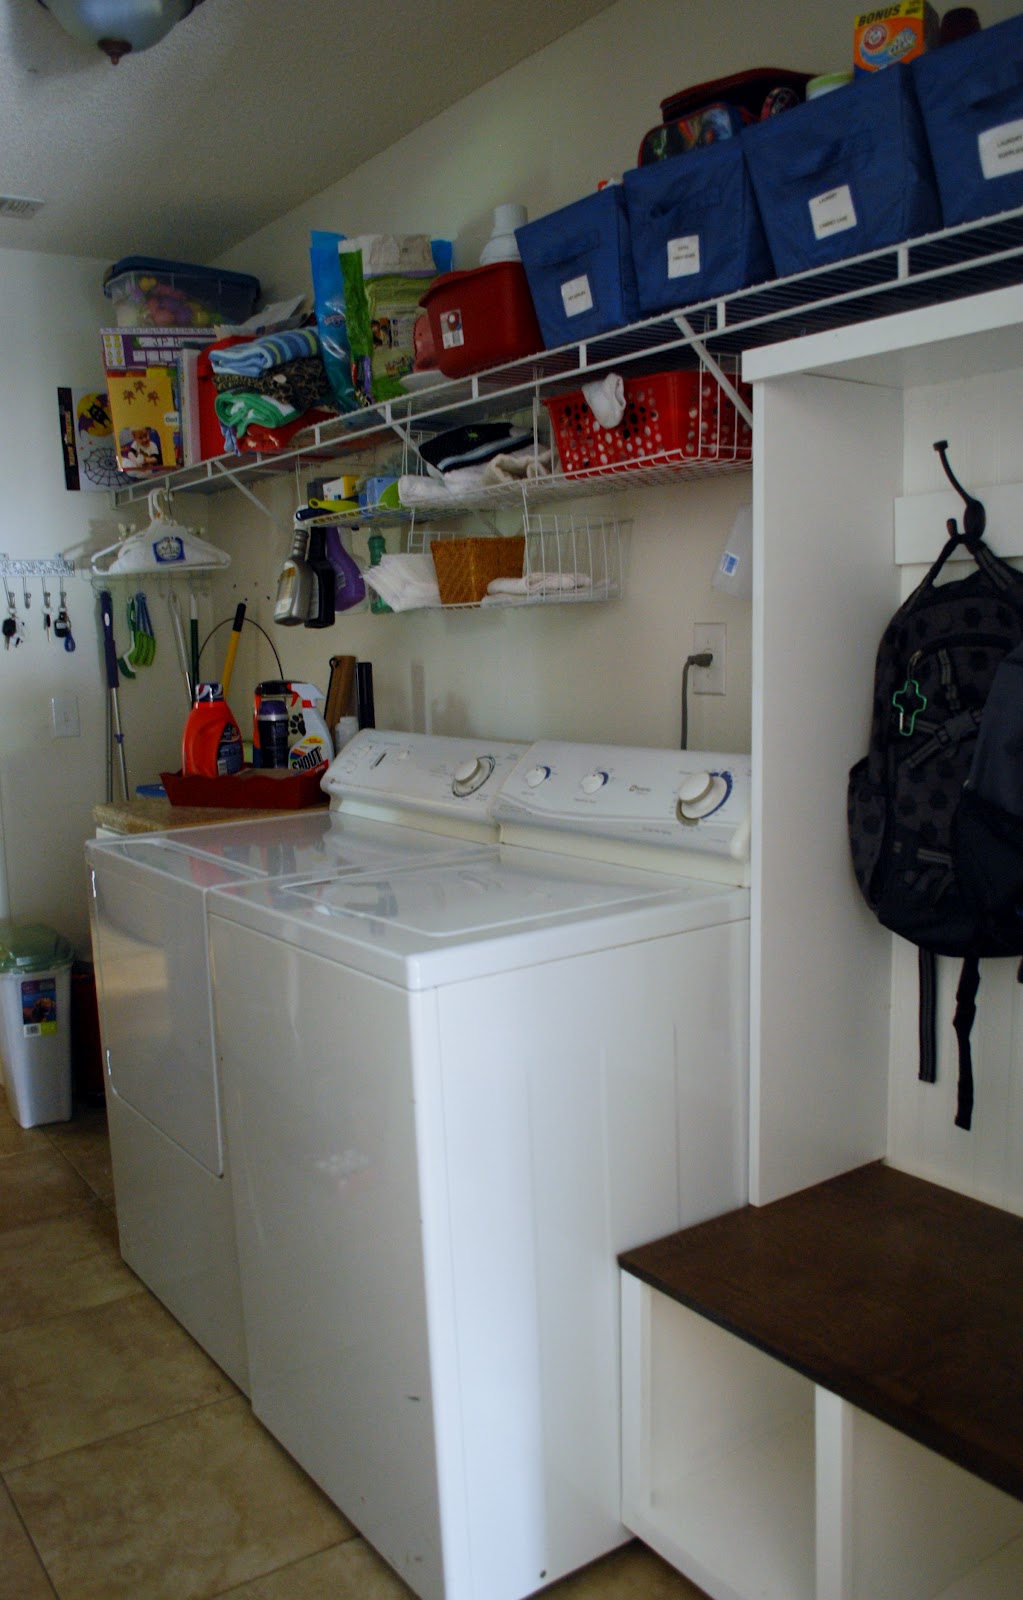 Done is better than Perfect: Project Laundry Room Entry Way Organization